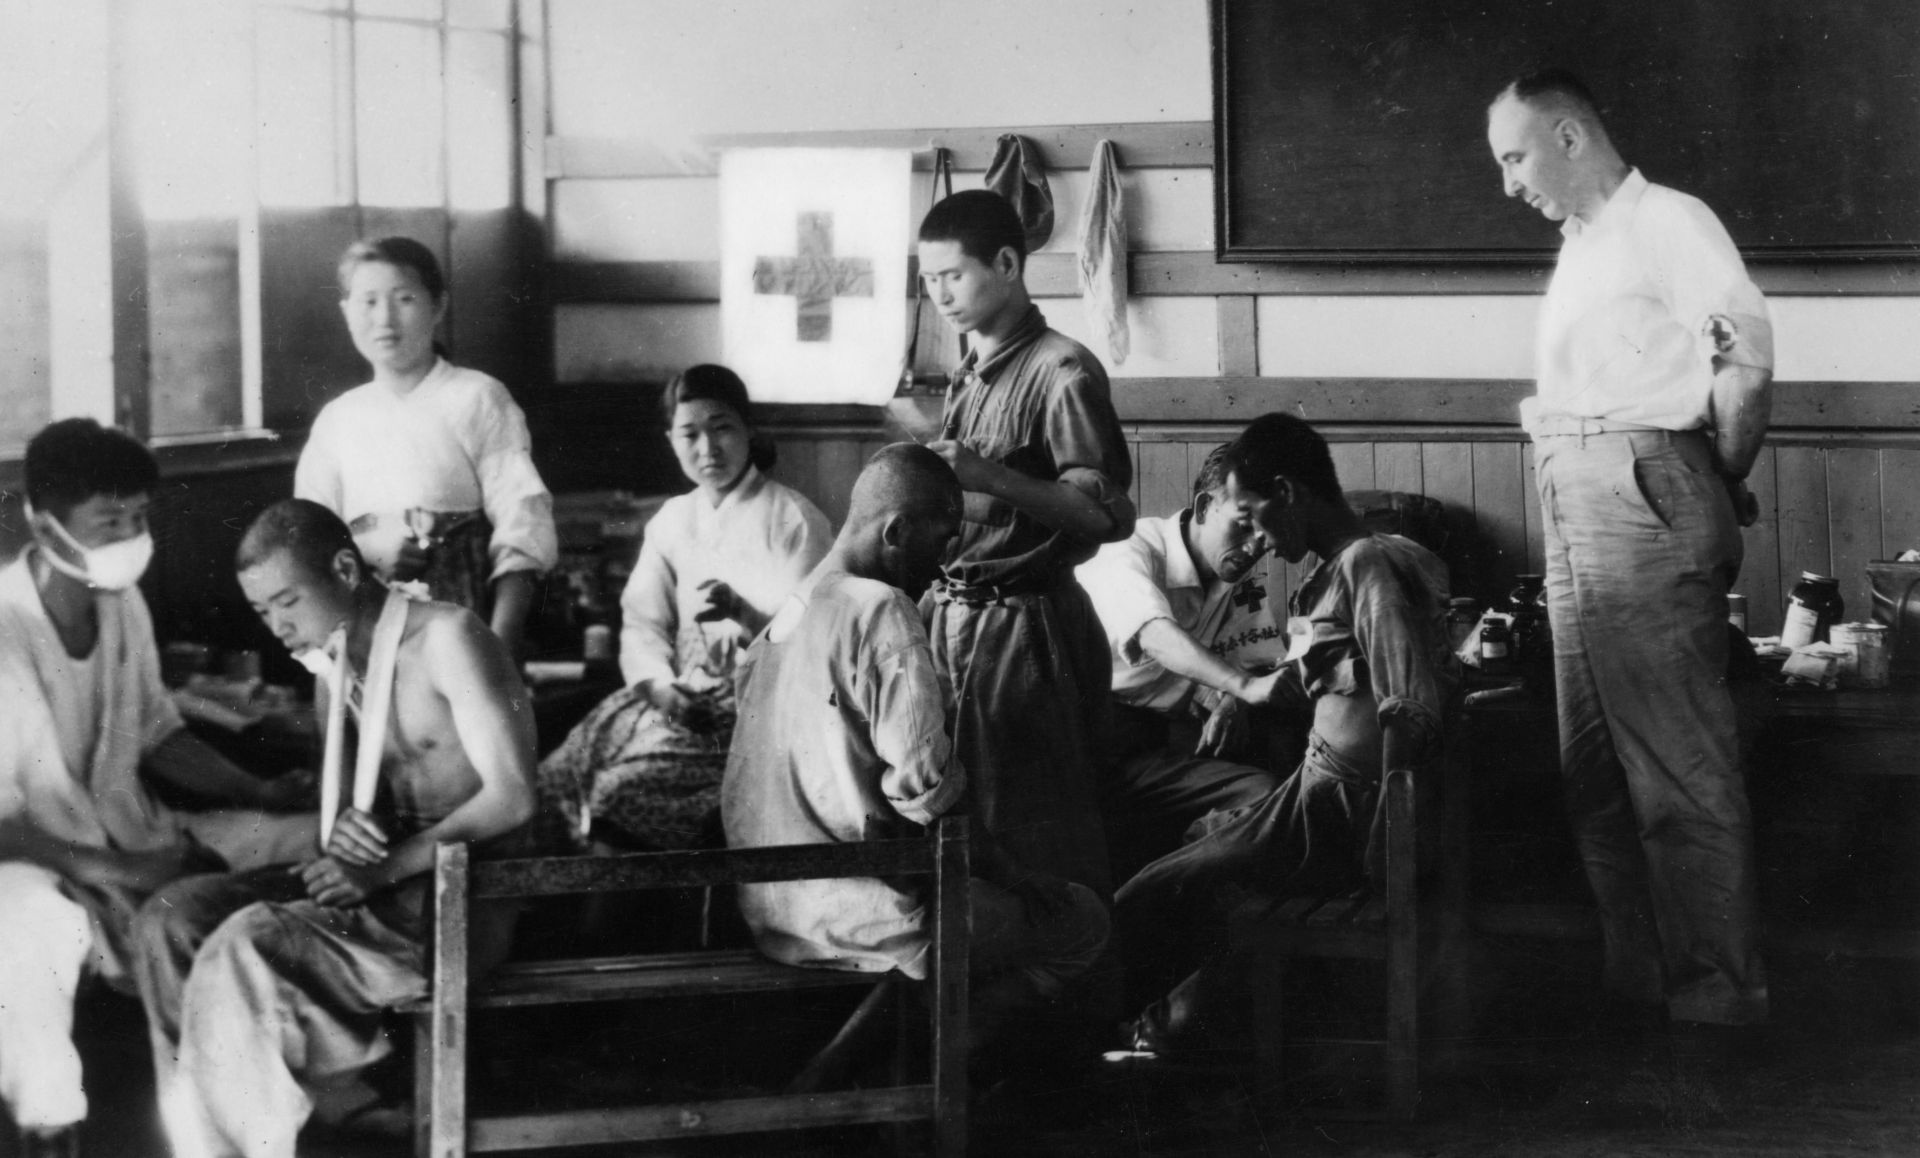 epa08505423 A handout photo made available by the International Committee of the Red Cross (ICRC) via Yonhap shows Frederick Bieri (R), an ICRC delegate, looking at injured prisoners of war under treatment during a visit to Prison Camp No. 100 on July 27, 1950 (issued 24 June 2020). Yonhap News Agency obtained 70 black-and-white photographs from the ICRC and published them on 24 June 2020 for the 70th anniversary of the outbreak of the 1950-53 Korean War.  EPA/ICRC / HANDOUT SOUTH KOREA OUT HANDOUT EDITORIAL USE ONLY/NO SALES